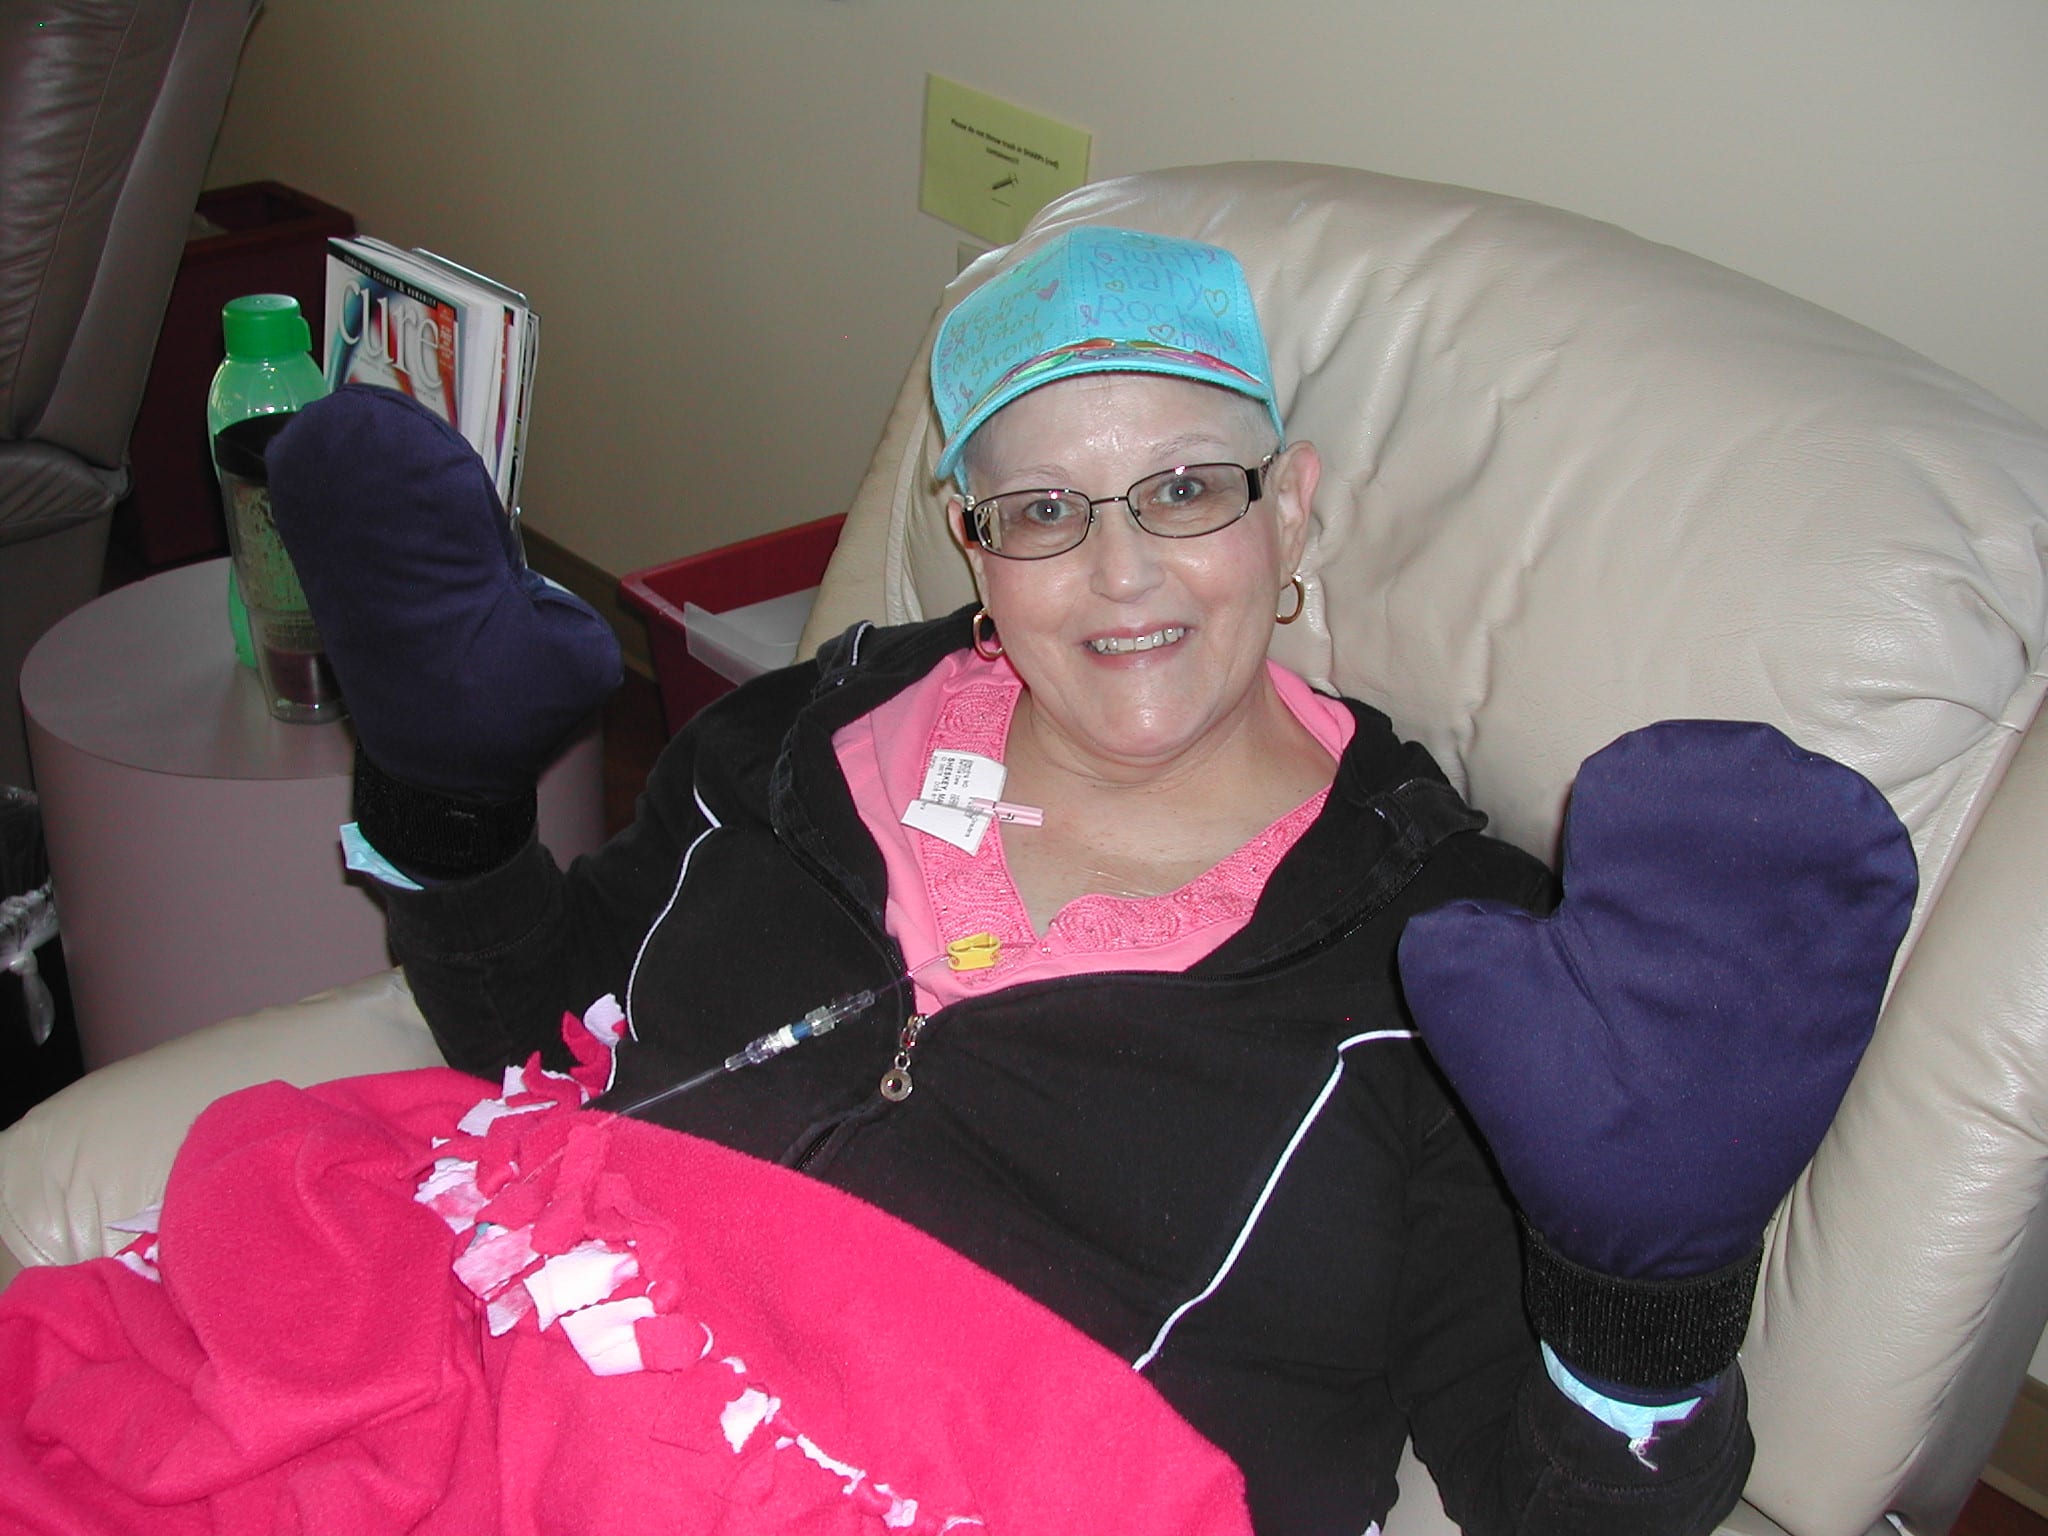 Mary during chemo with gloves on to protect her skin.